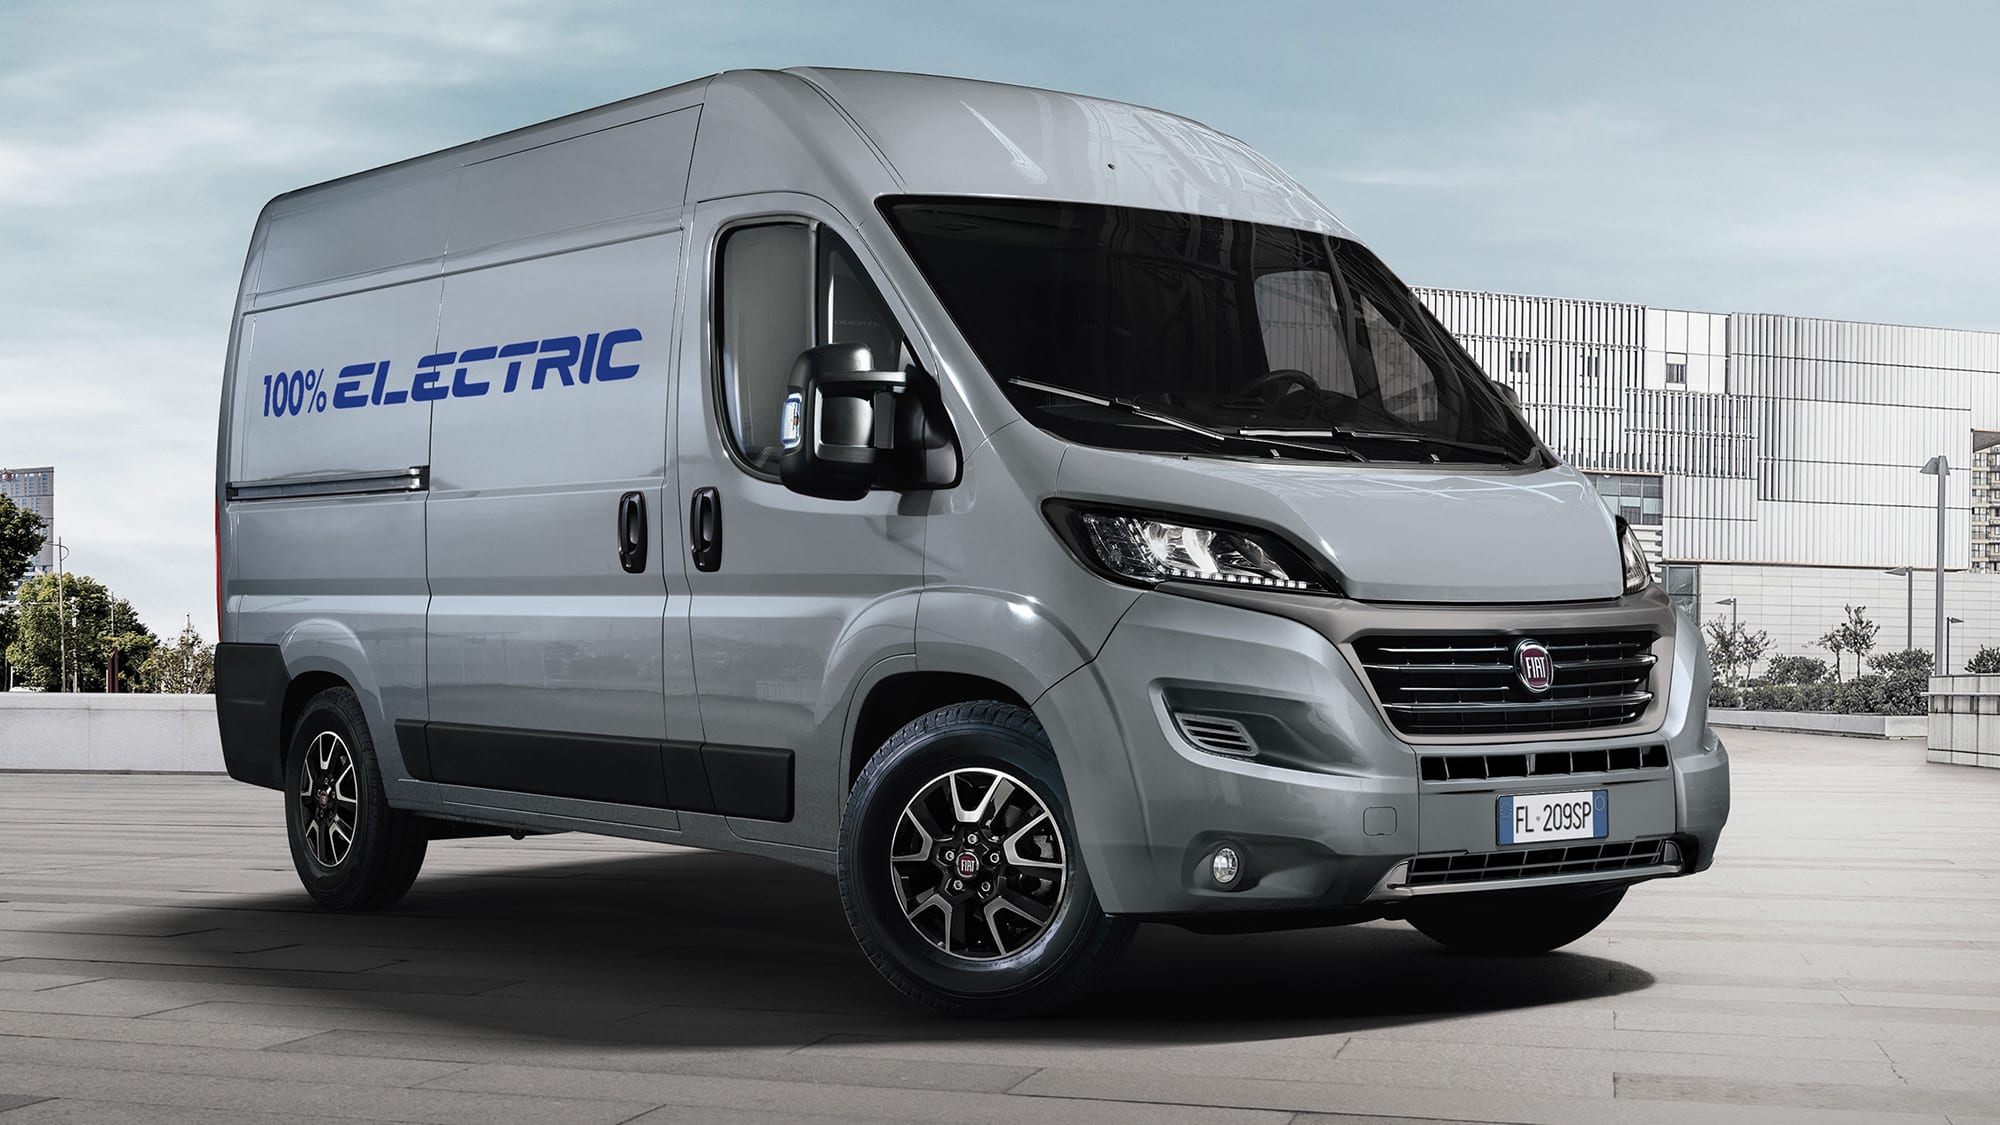 Fiat launches full-electric Ducato commercial van